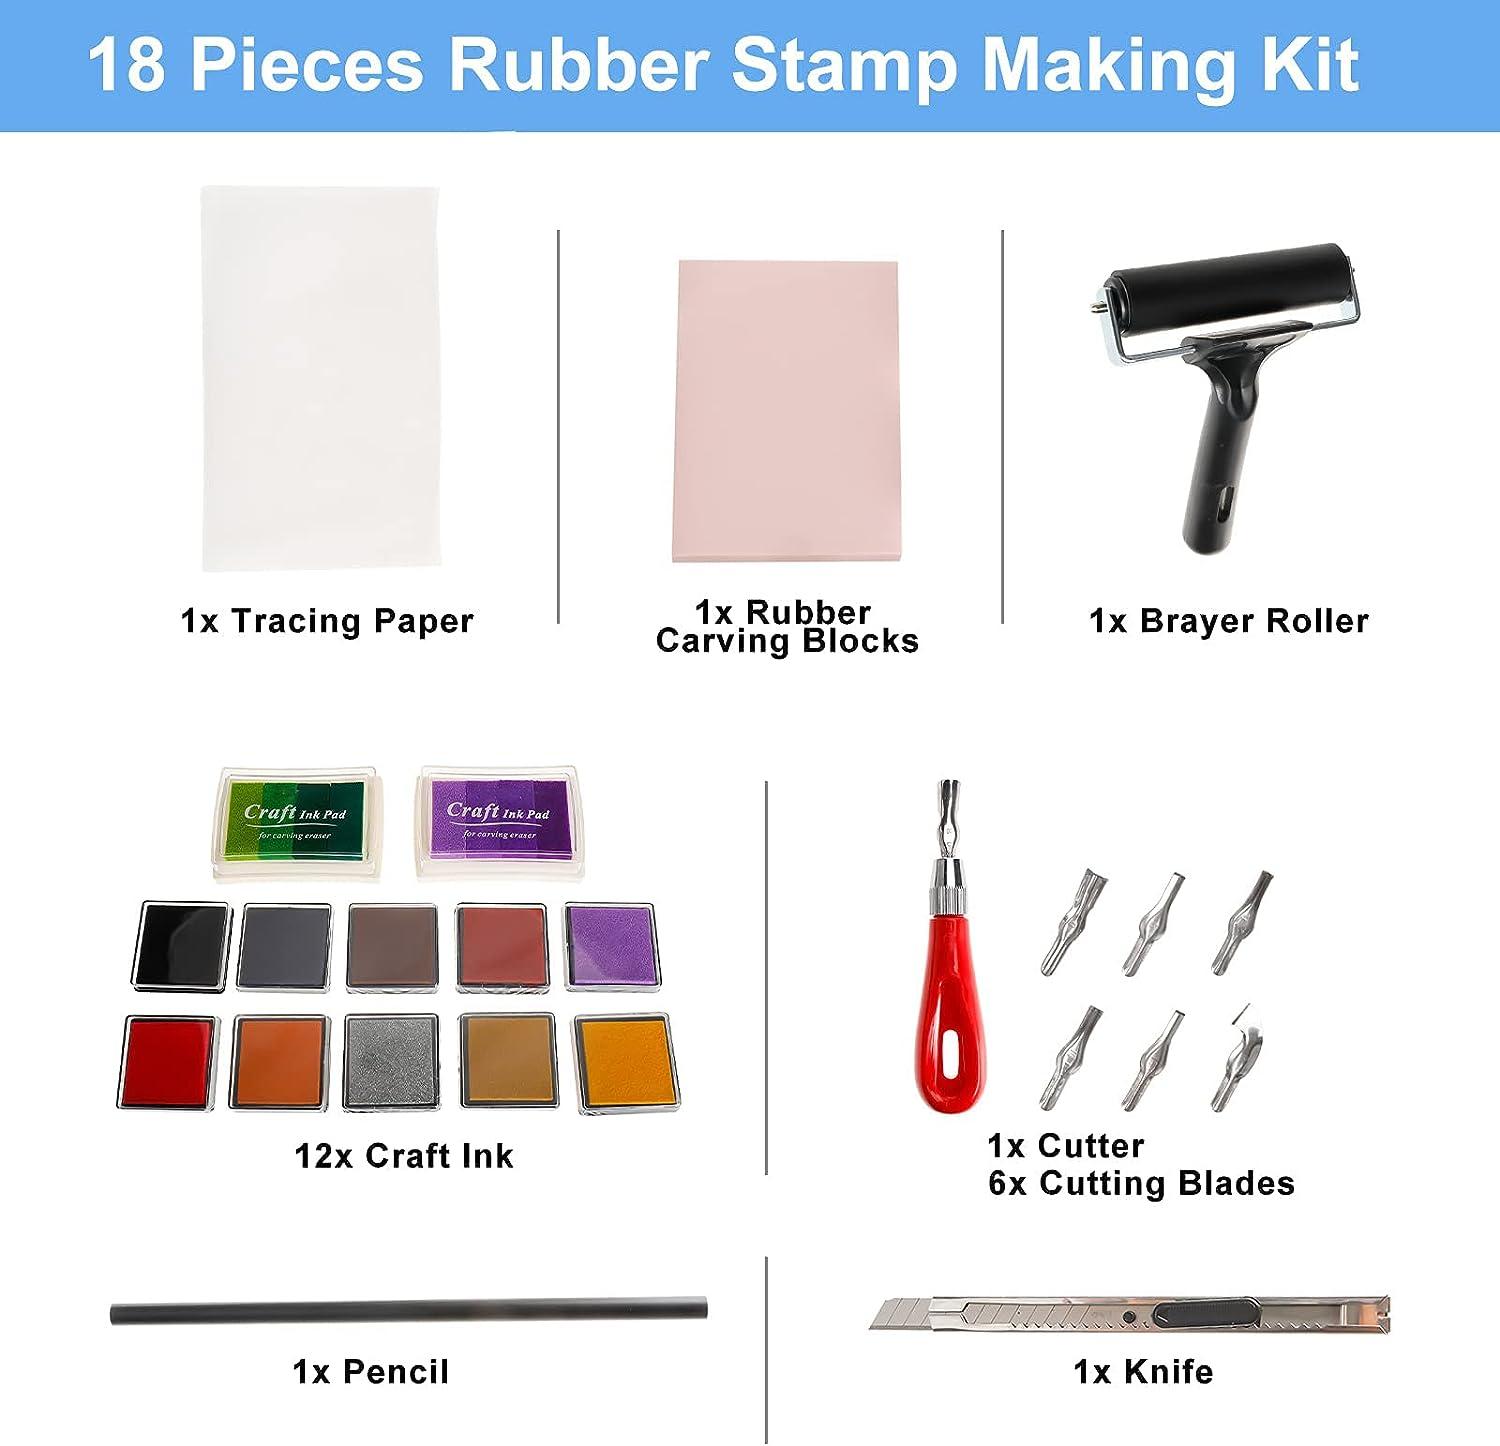 Rubber Block Stamp Carving Block Stamp Making Kit with Cutter